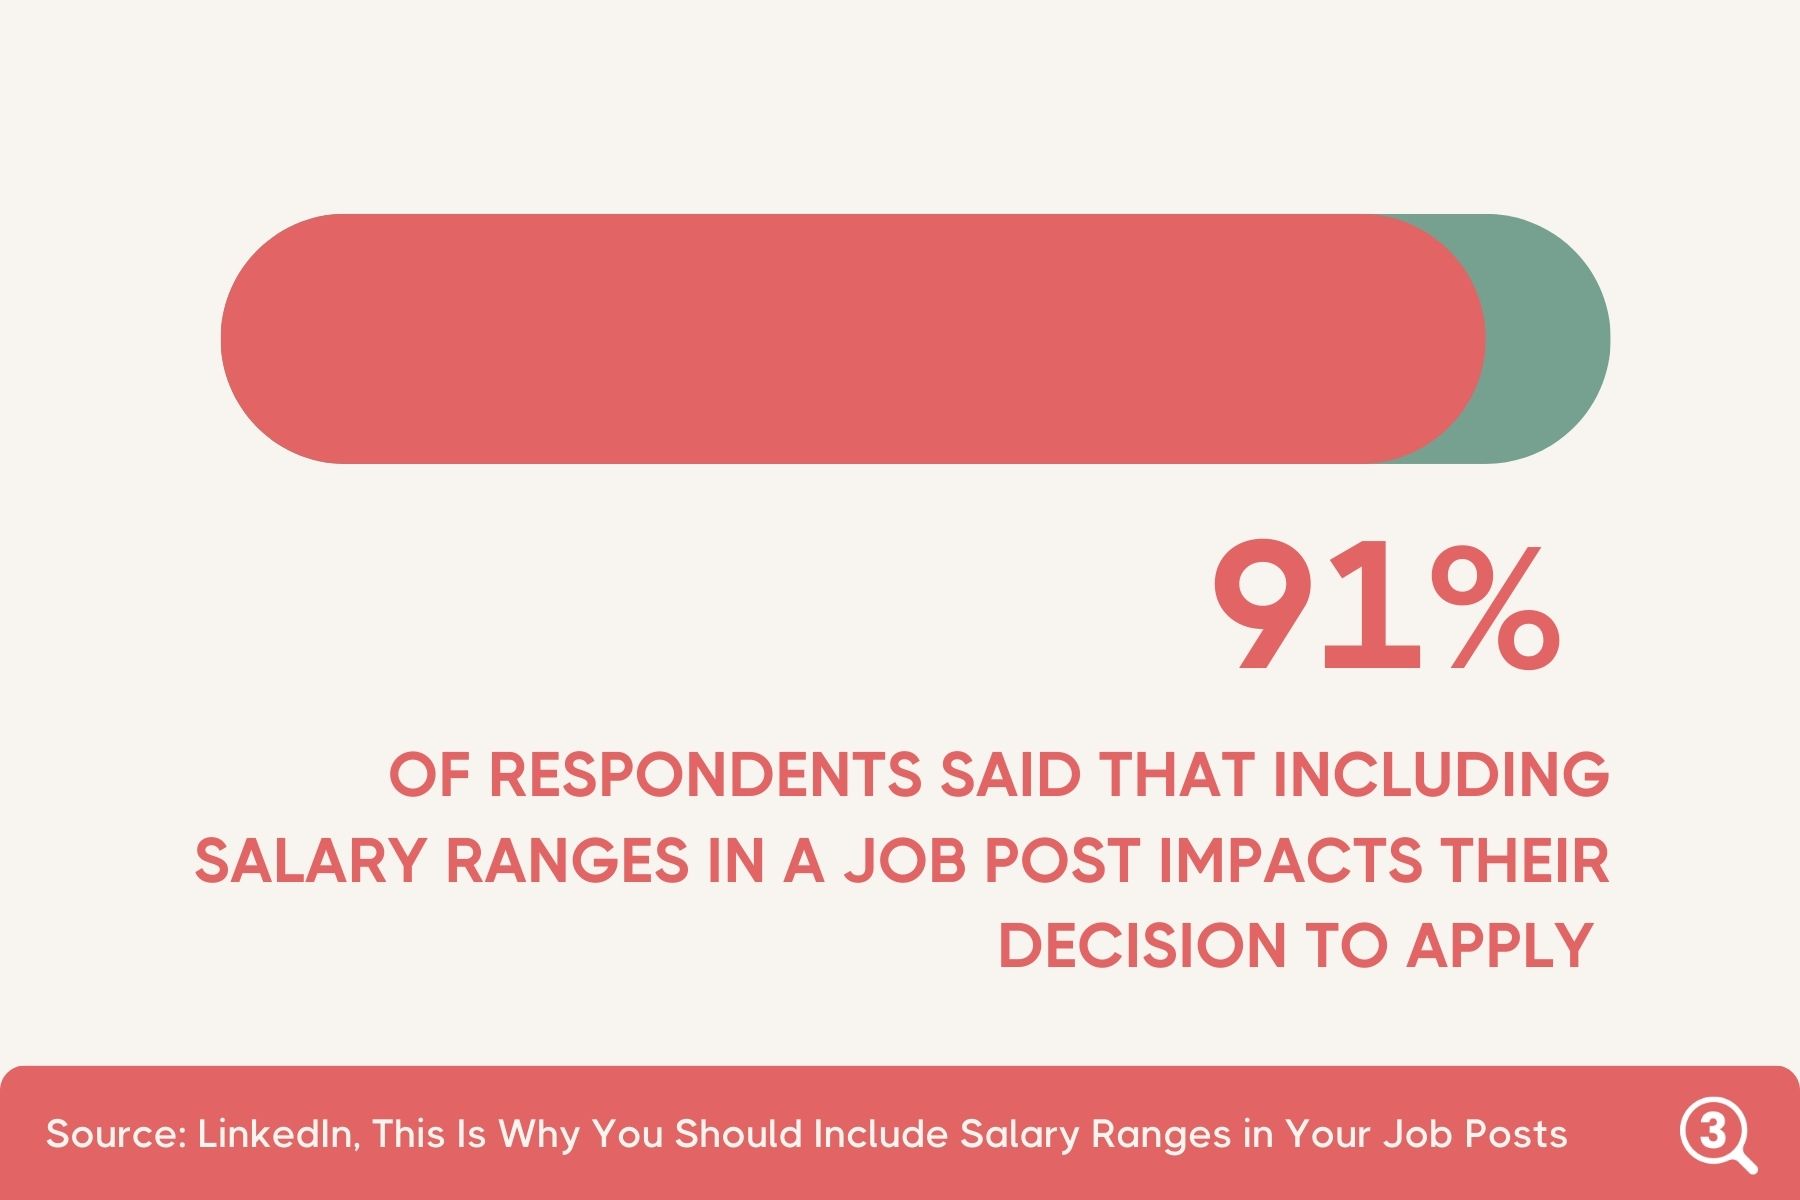 A bar showing that 91% of respondents to a LinkedIn survey said that salary information impacts their decision to apply to a job